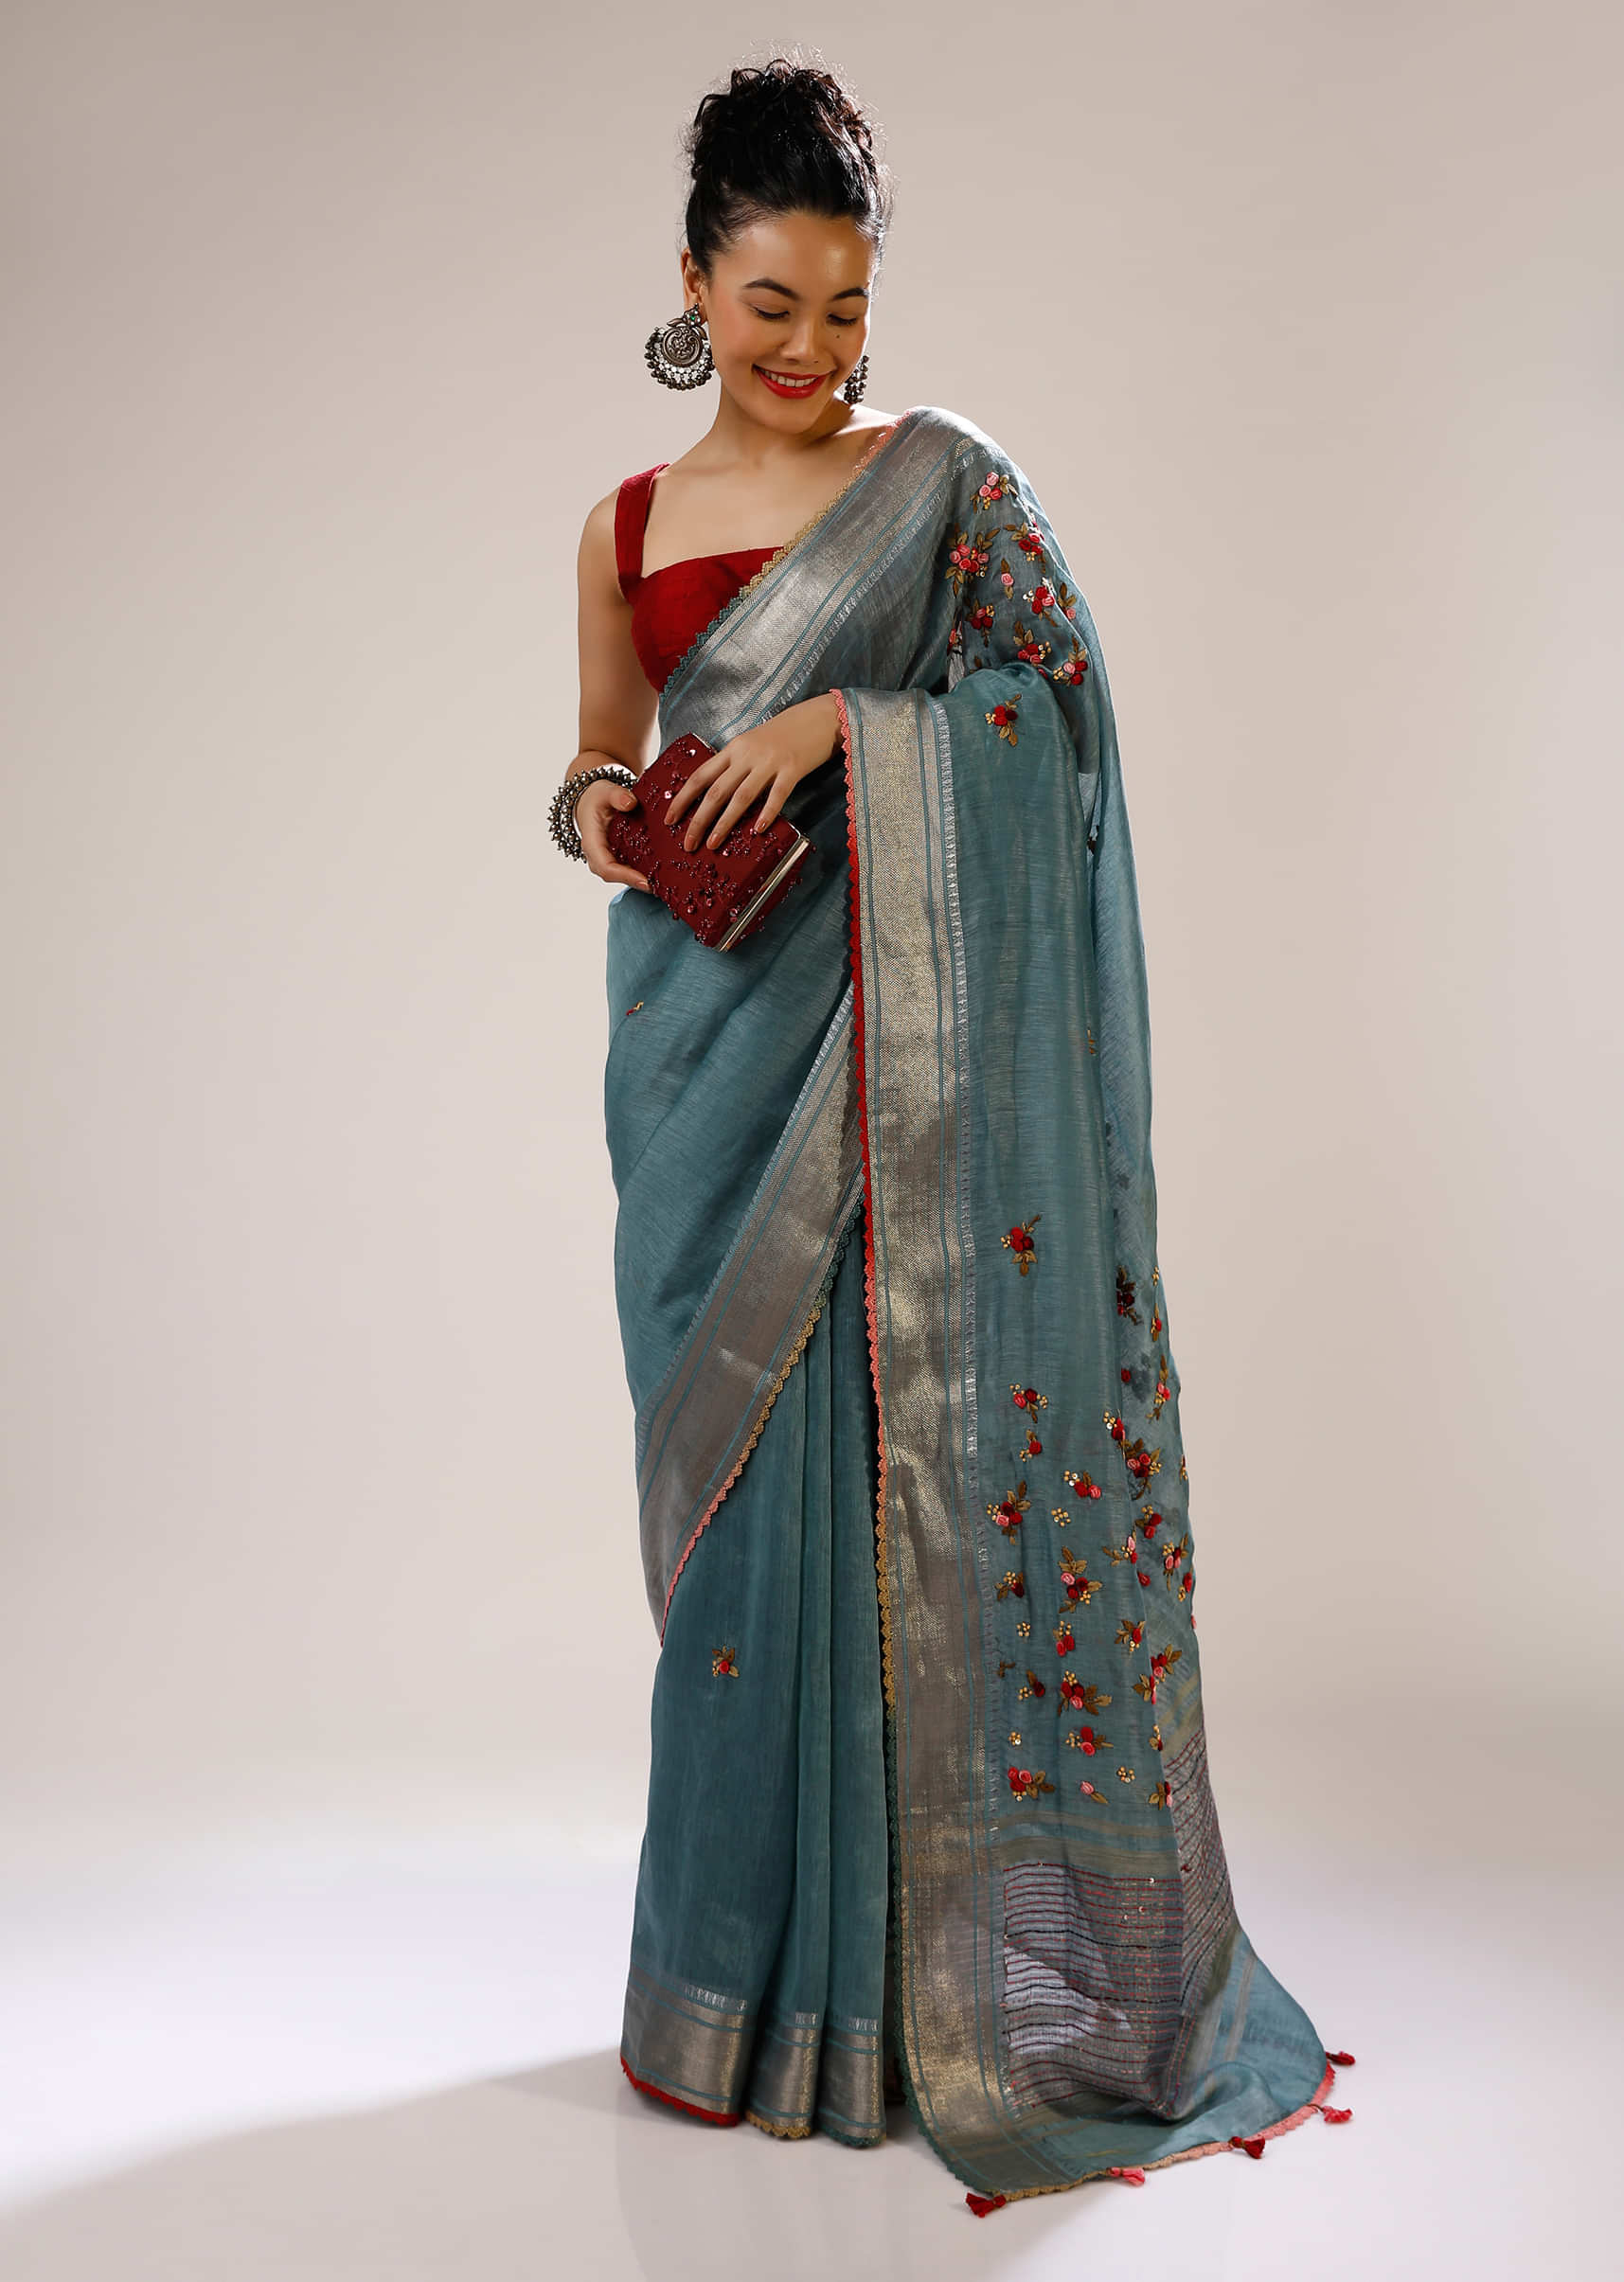 Cameo Blue Saree In Tussar Silk With Multicolored Bud Hand Embroidered Roses And Running Stich Design  